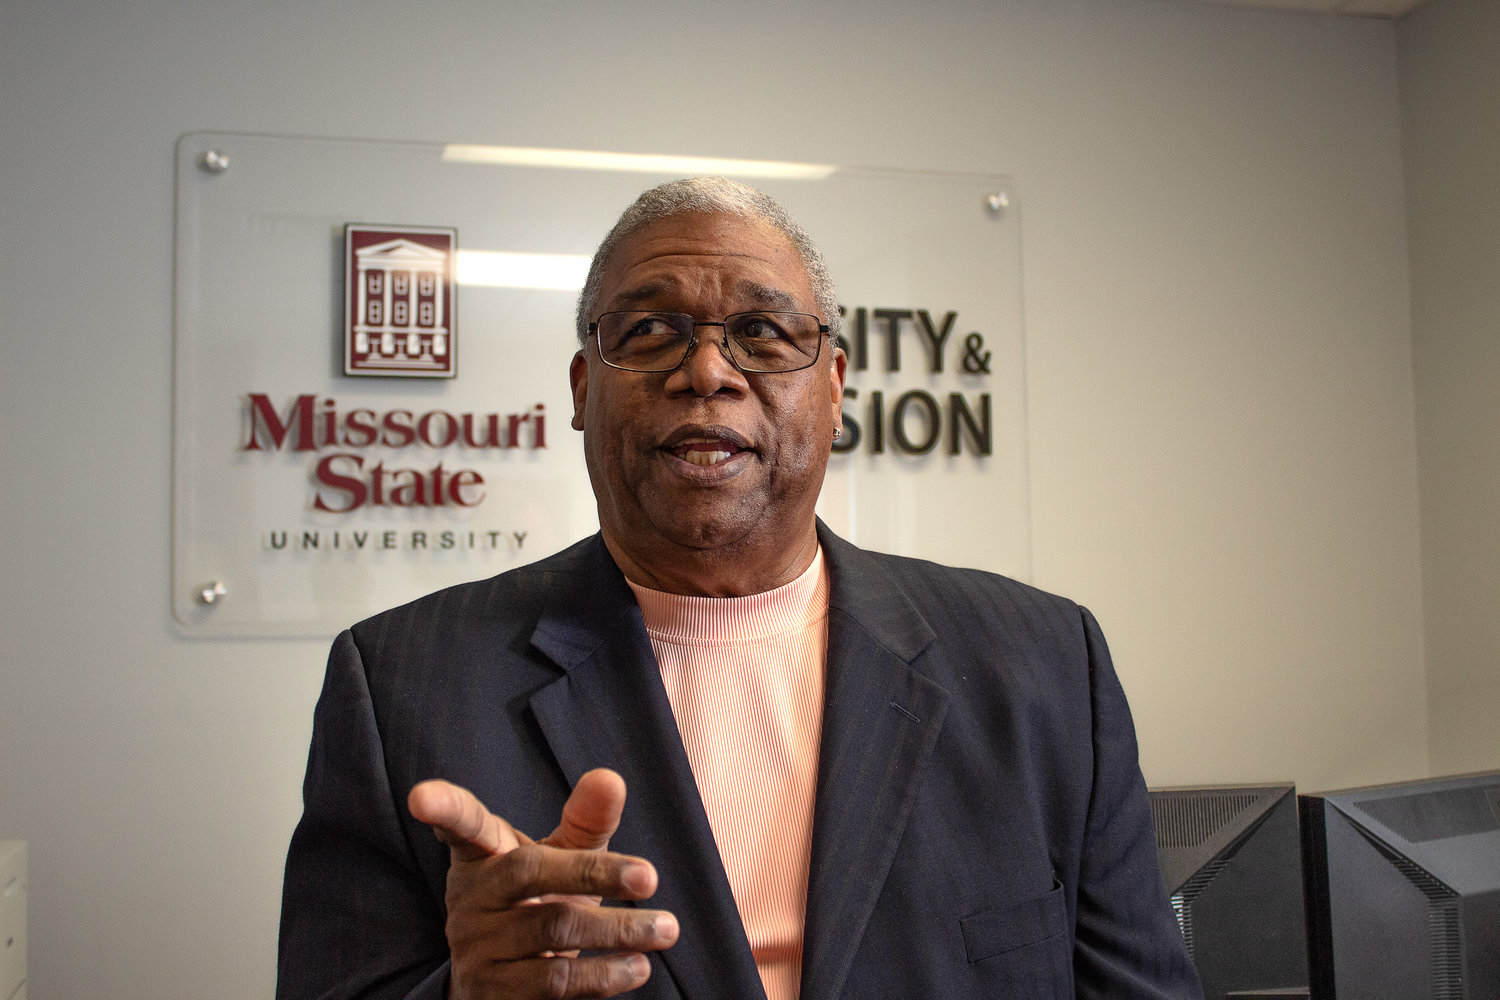 Taking a break from packing up his office, Wes Pratt reflects on his career as chief diversity officer at Missouri State University.